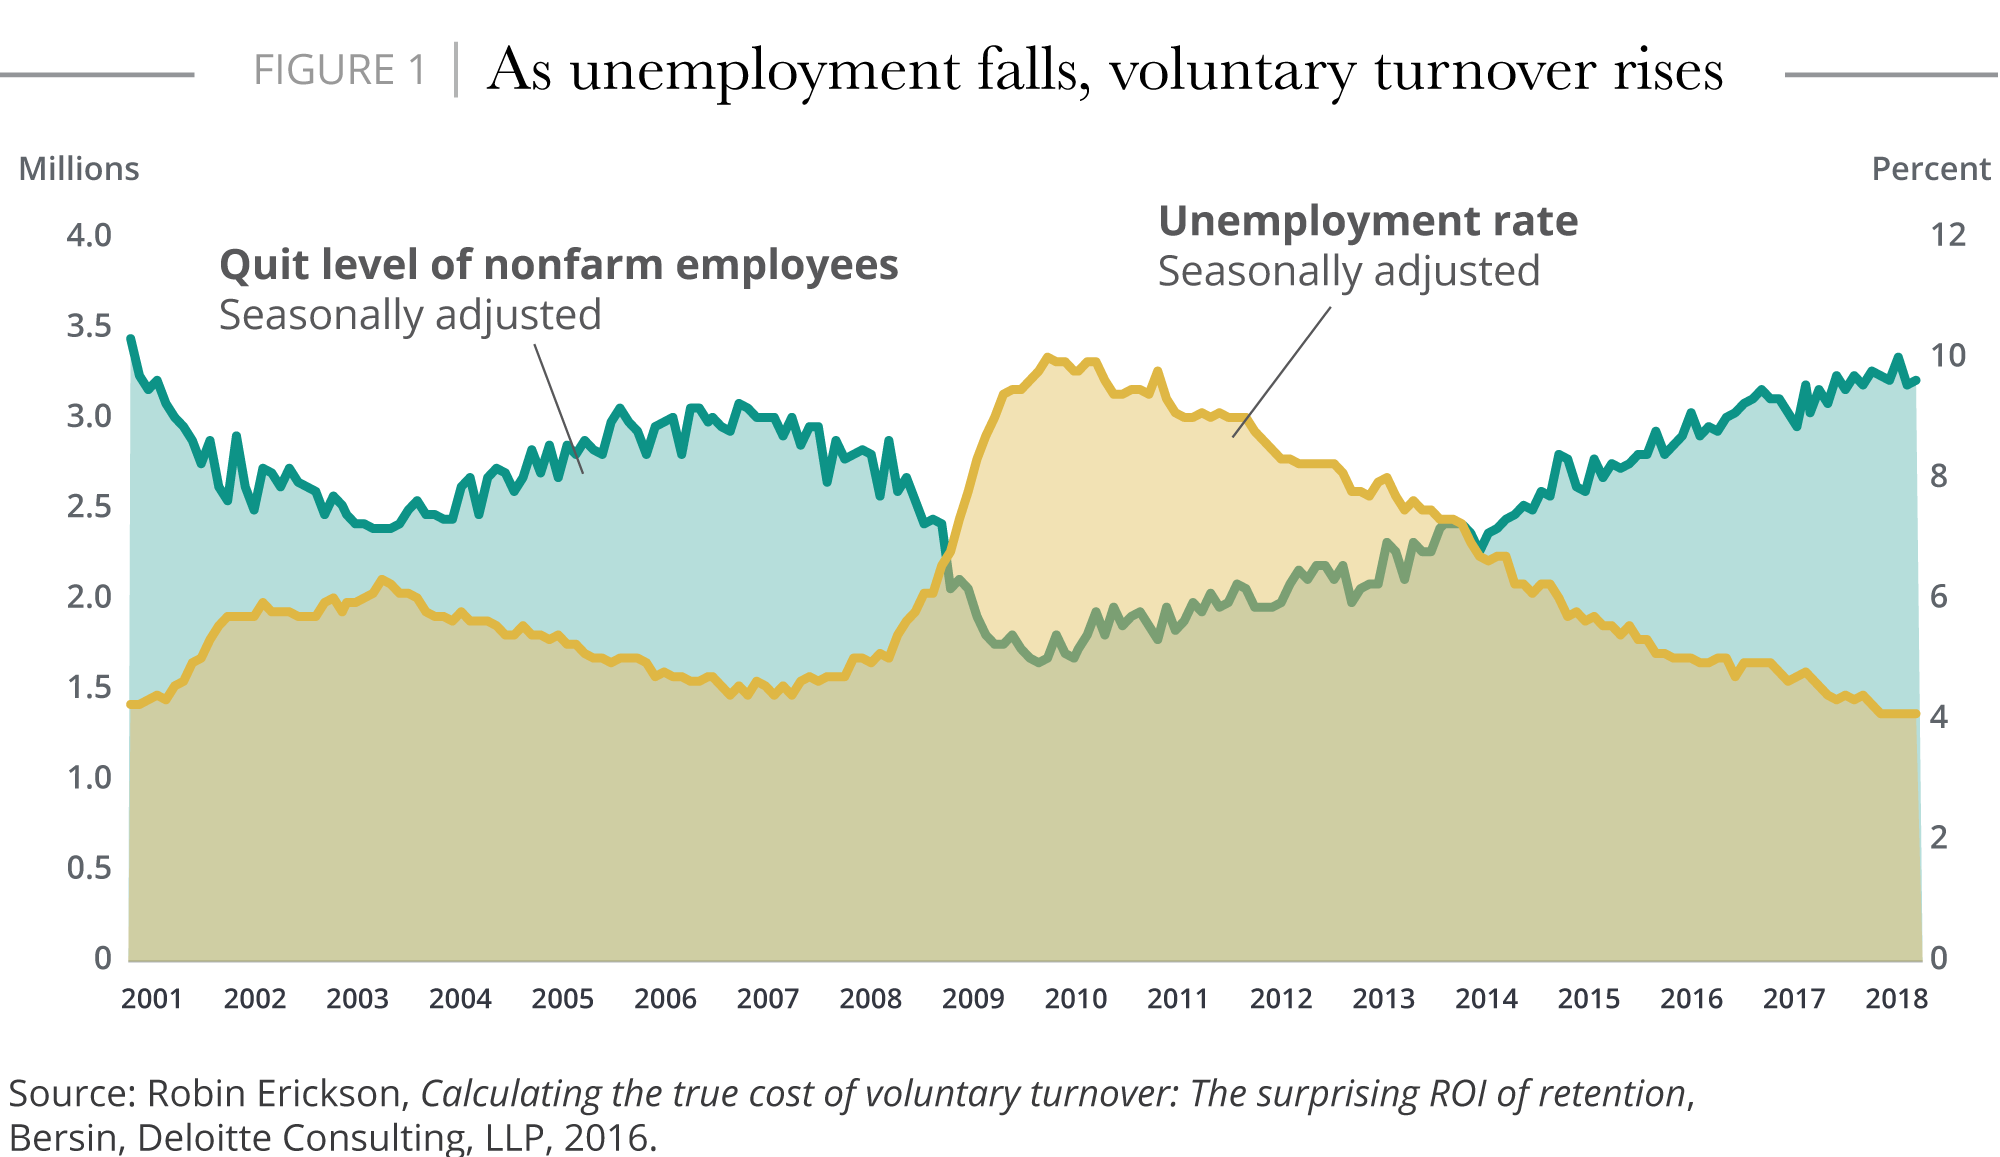 As unemployment falls, voluntary turnover rises